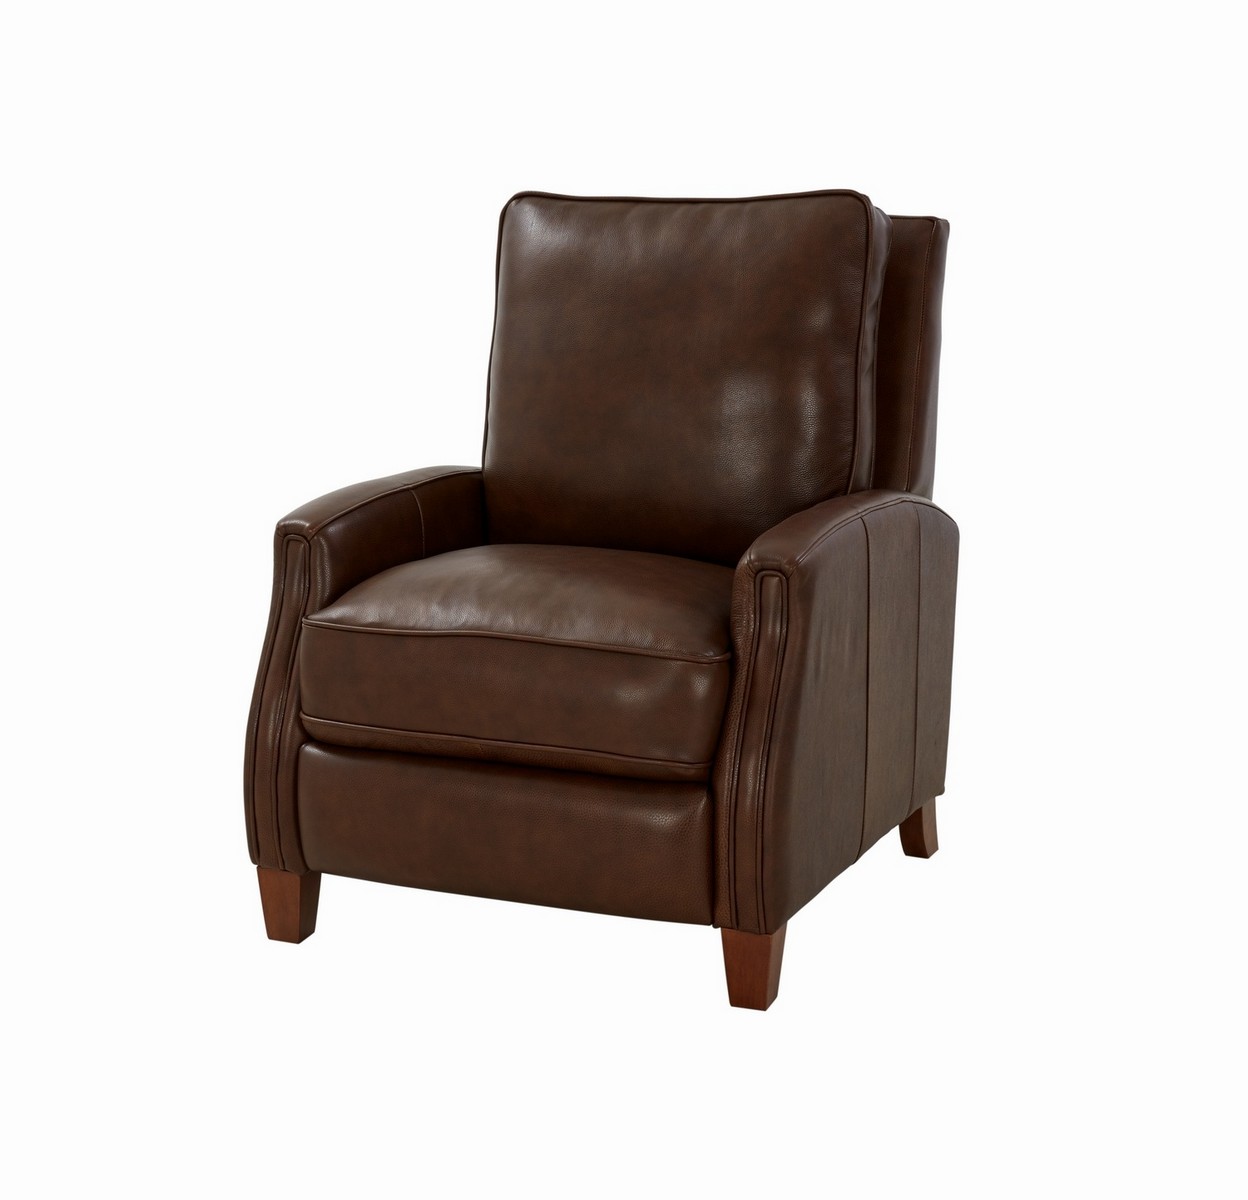 Barcalounger Penrose Power Recliner Chair - Wenlock Double Chocolate/All Leather